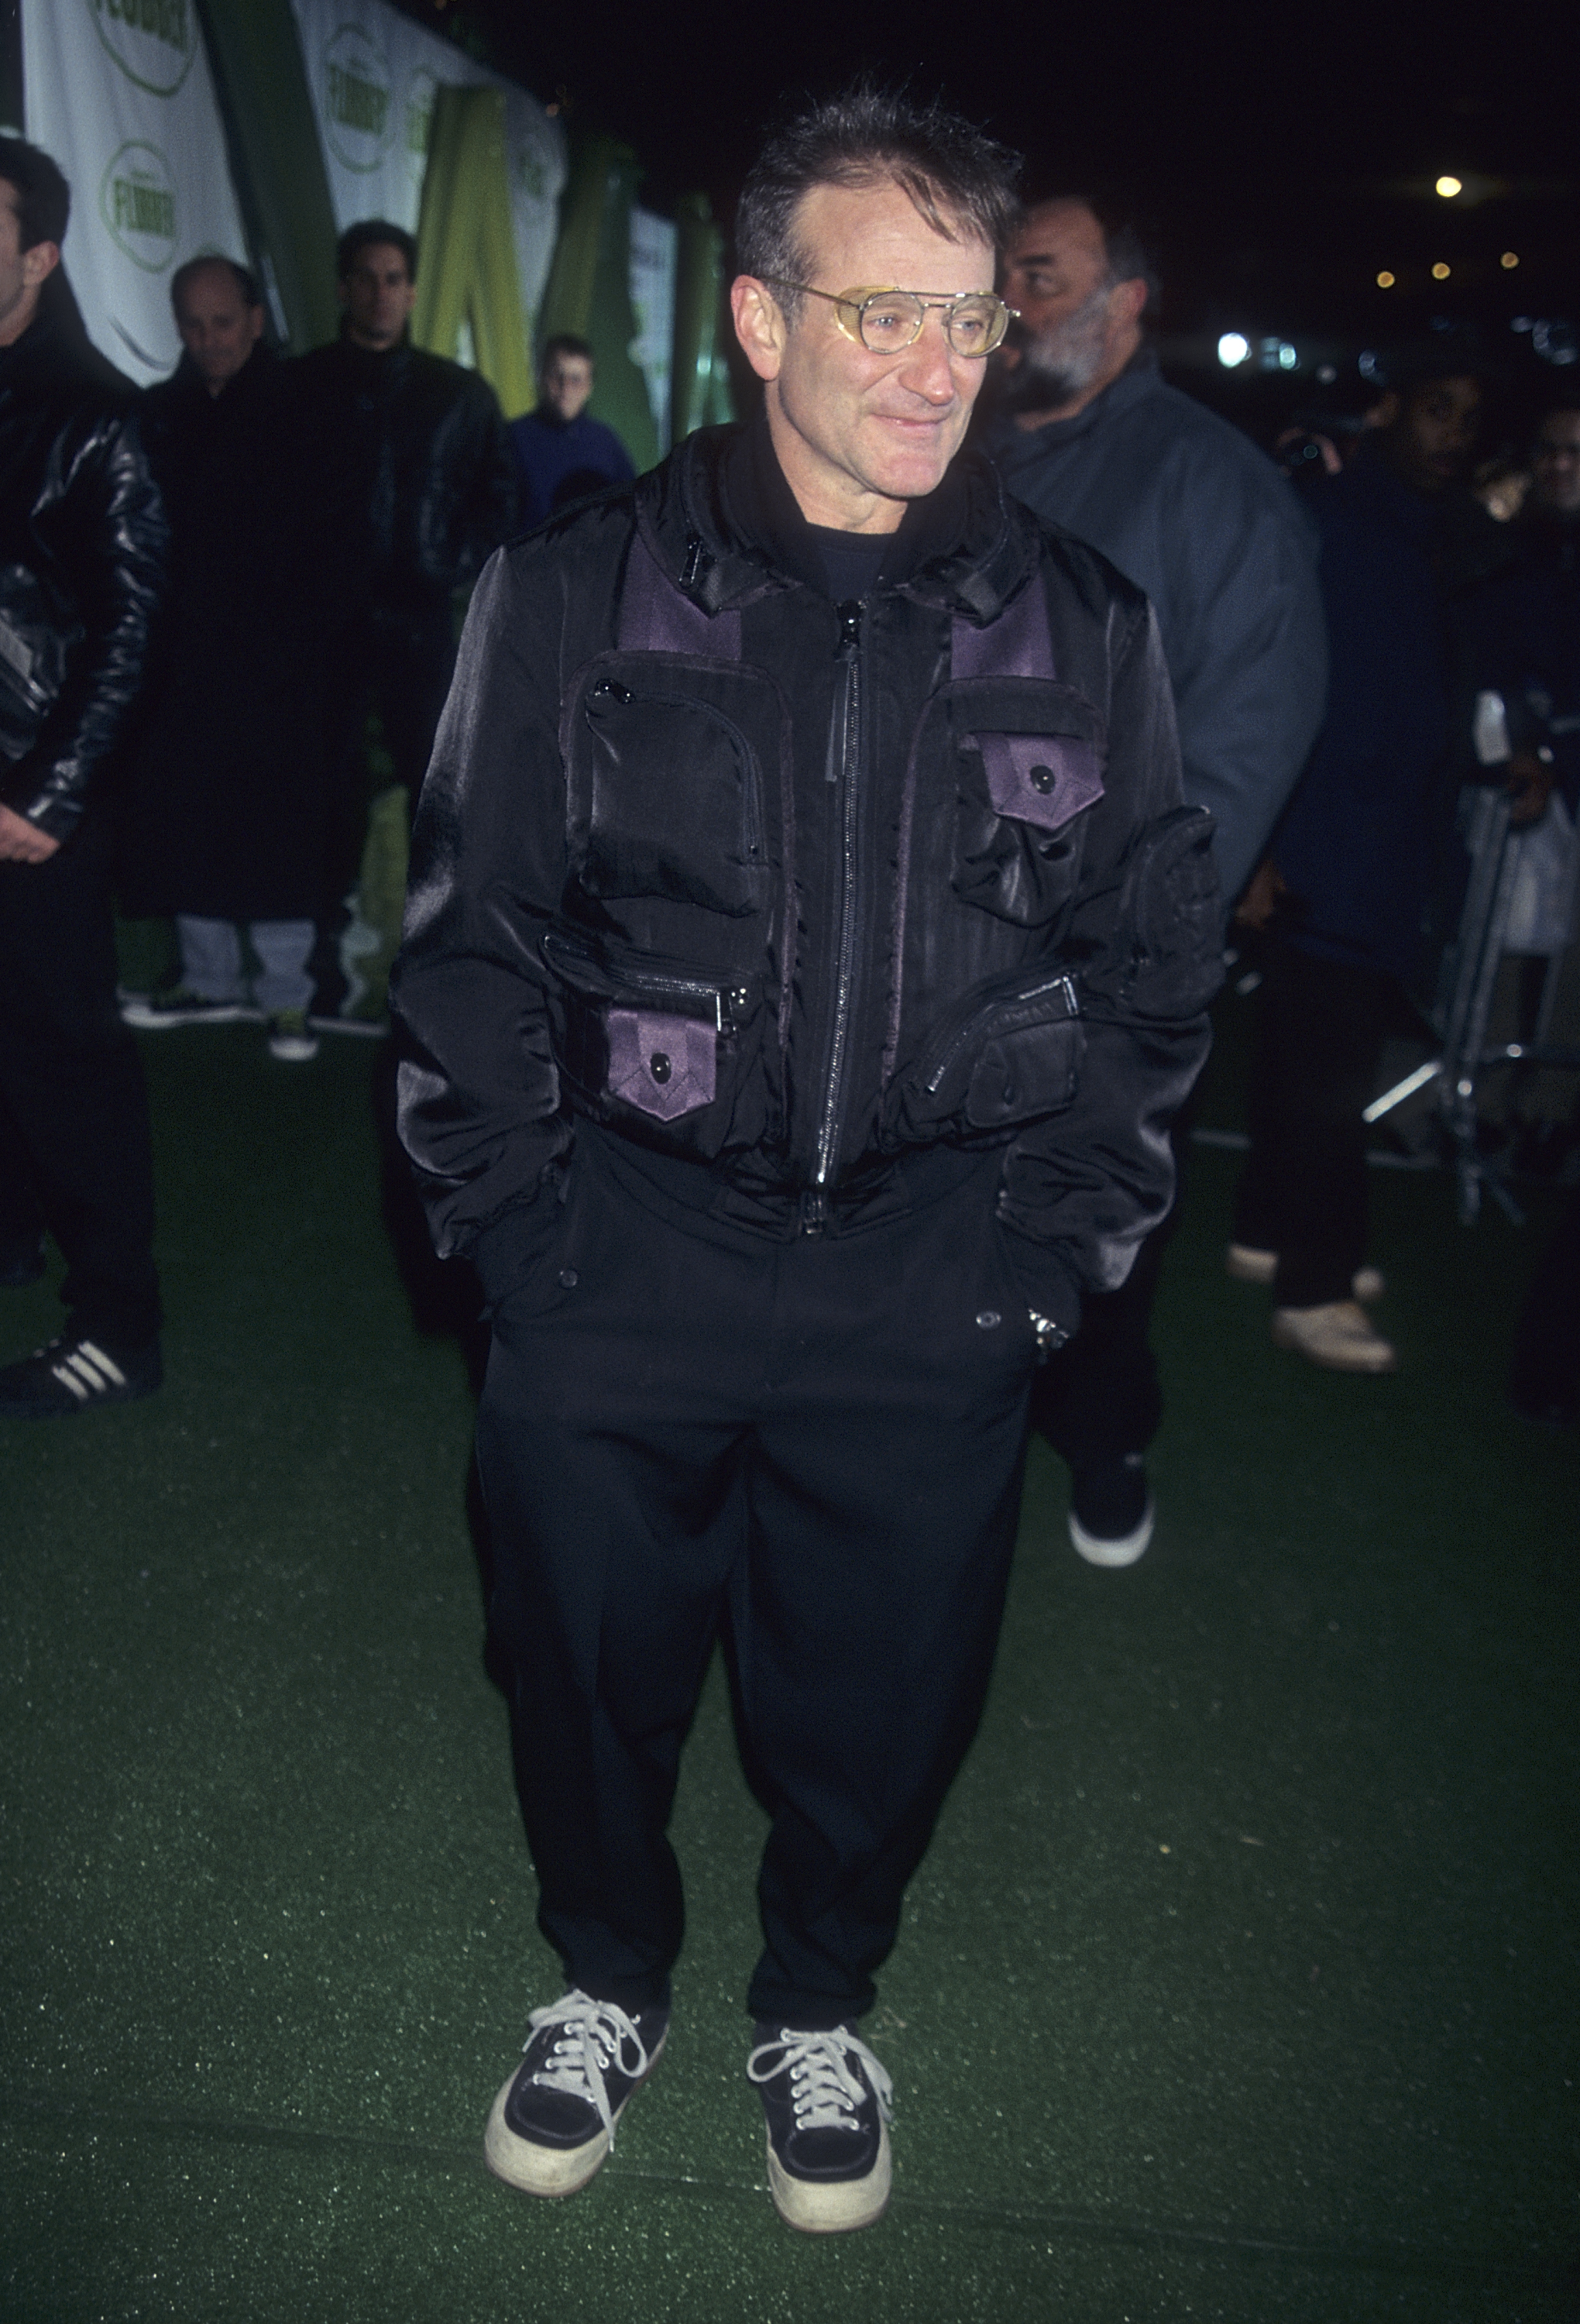 Robin Williams in Issey Miyake at the Flubber premiere in 1997